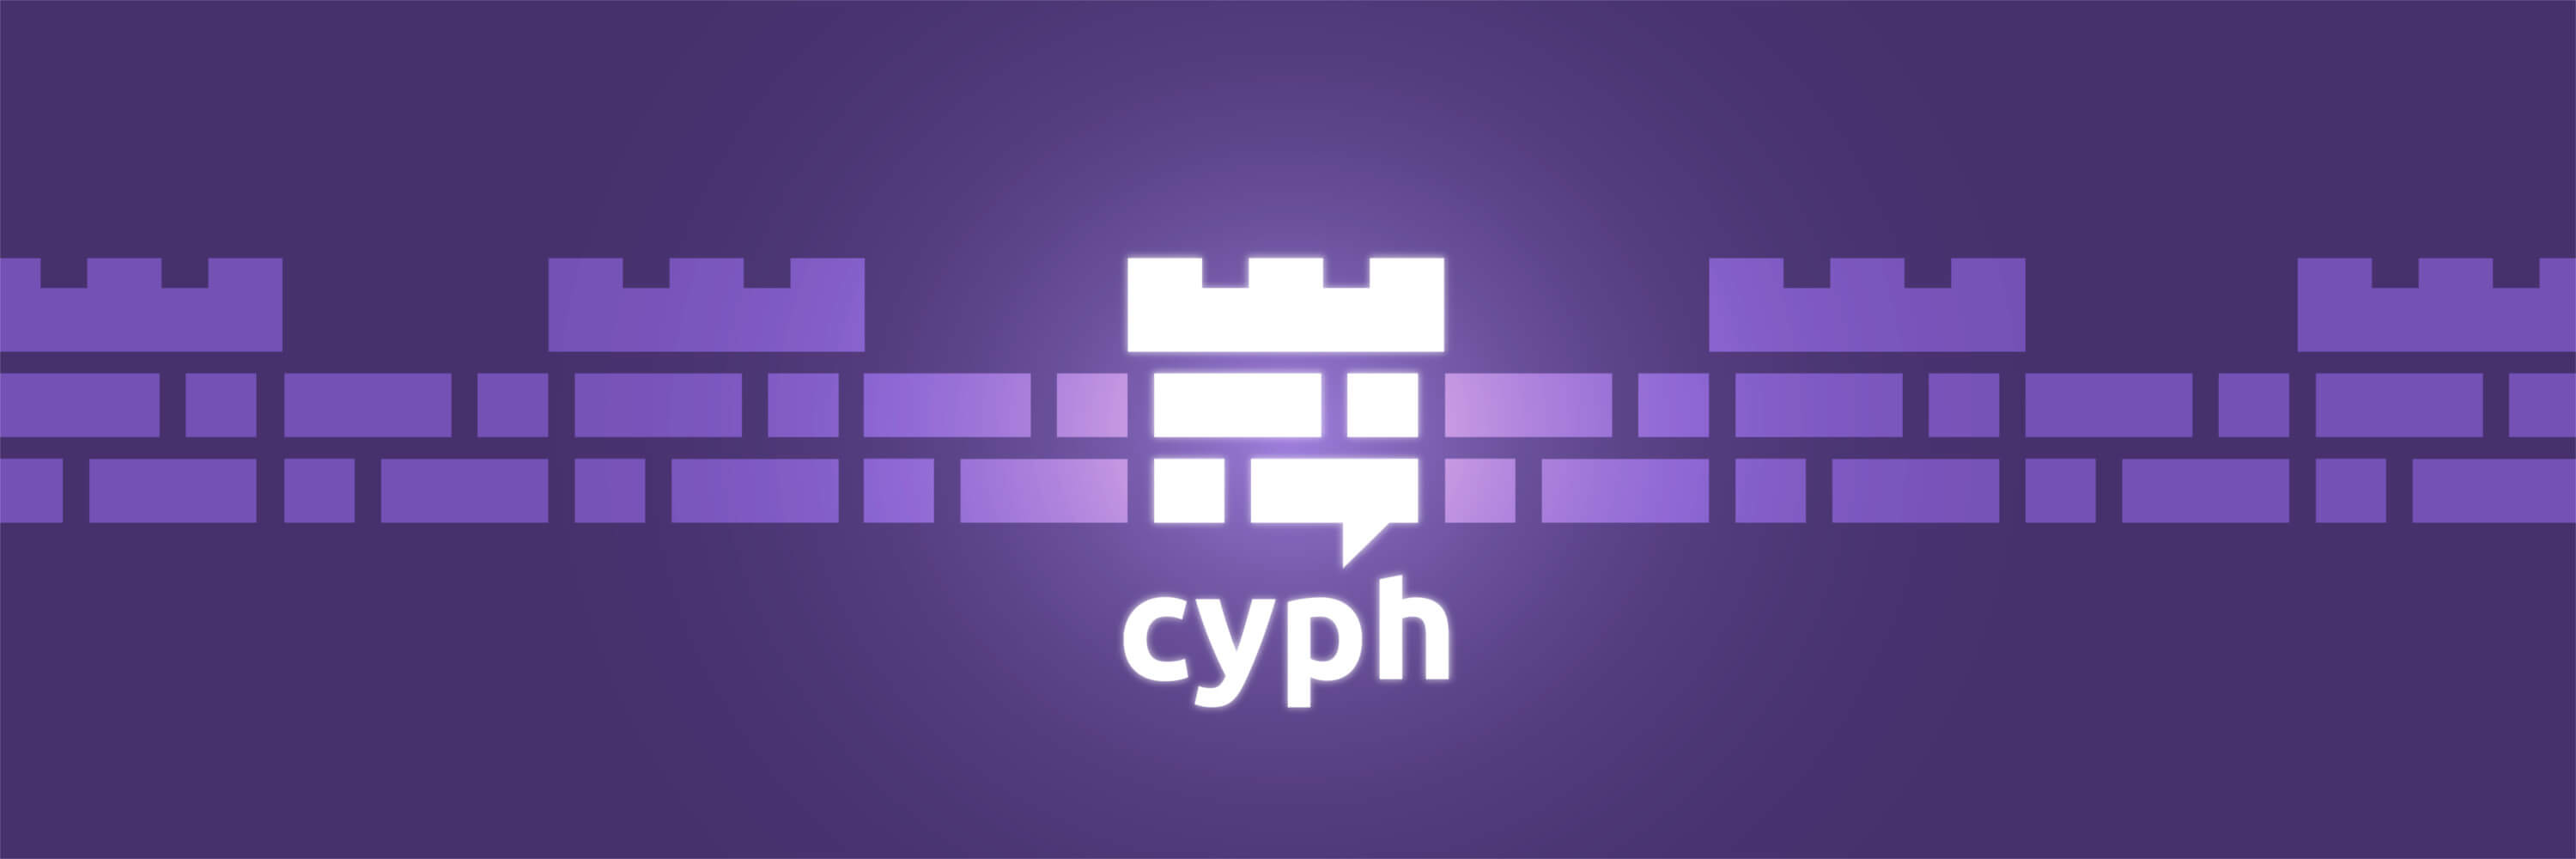 Cyph Becomes First Tor Service to be Issued EV SSL Cert